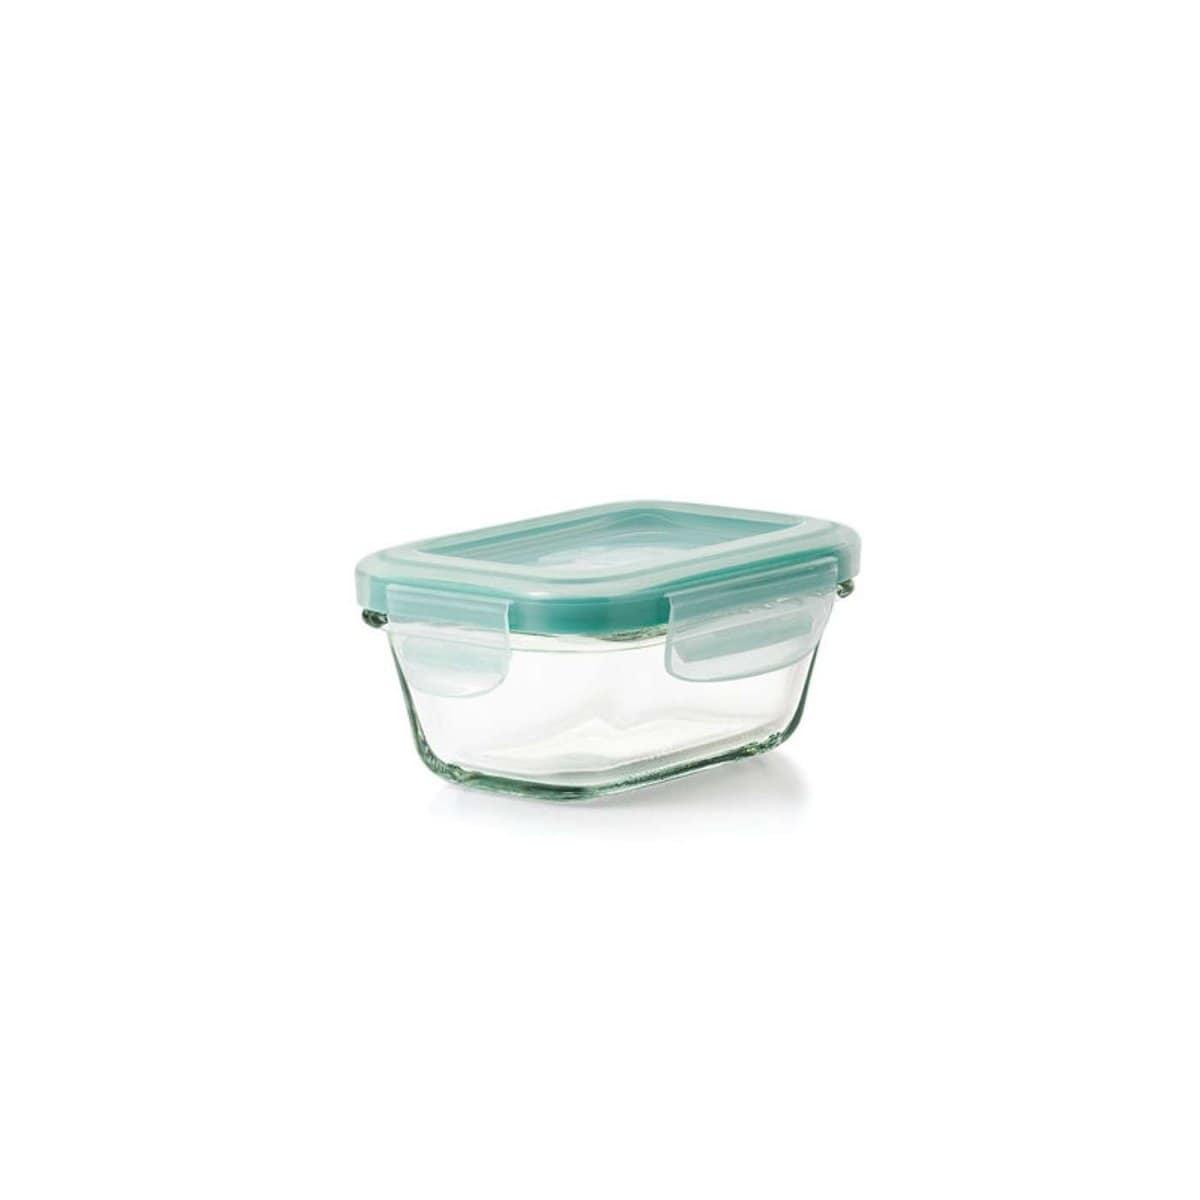 https://cdn.shopify.com/s/files/1/0474/2338/9856/products/oxo-oxo-good-grips-snap-glass-rectangle-container-4-oz-719812047447-19594519117984_1600x.jpg?v=1628218777